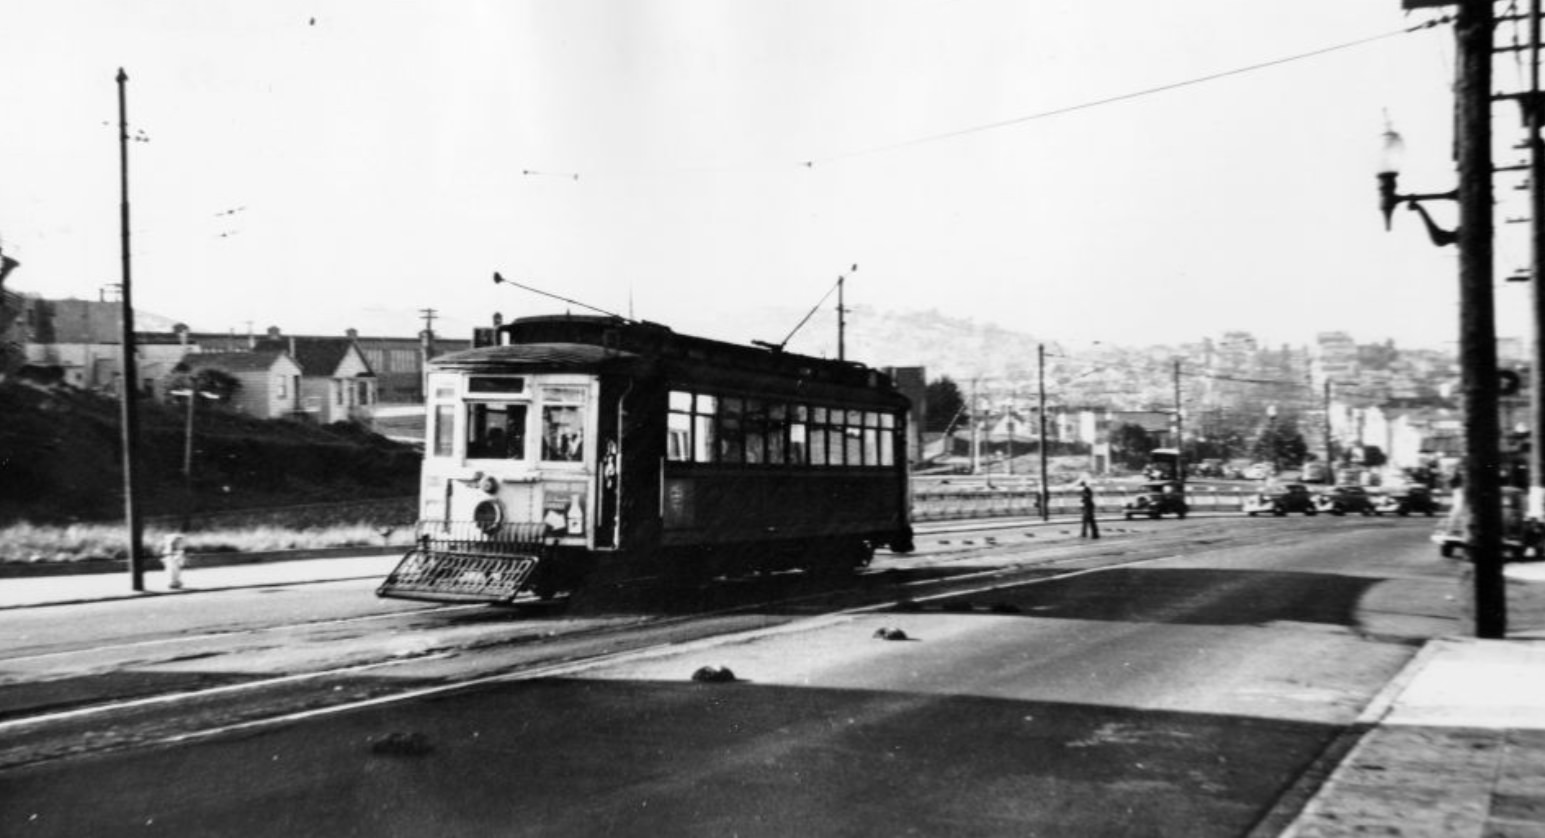 Mission Street at Appleton looking south, 1932